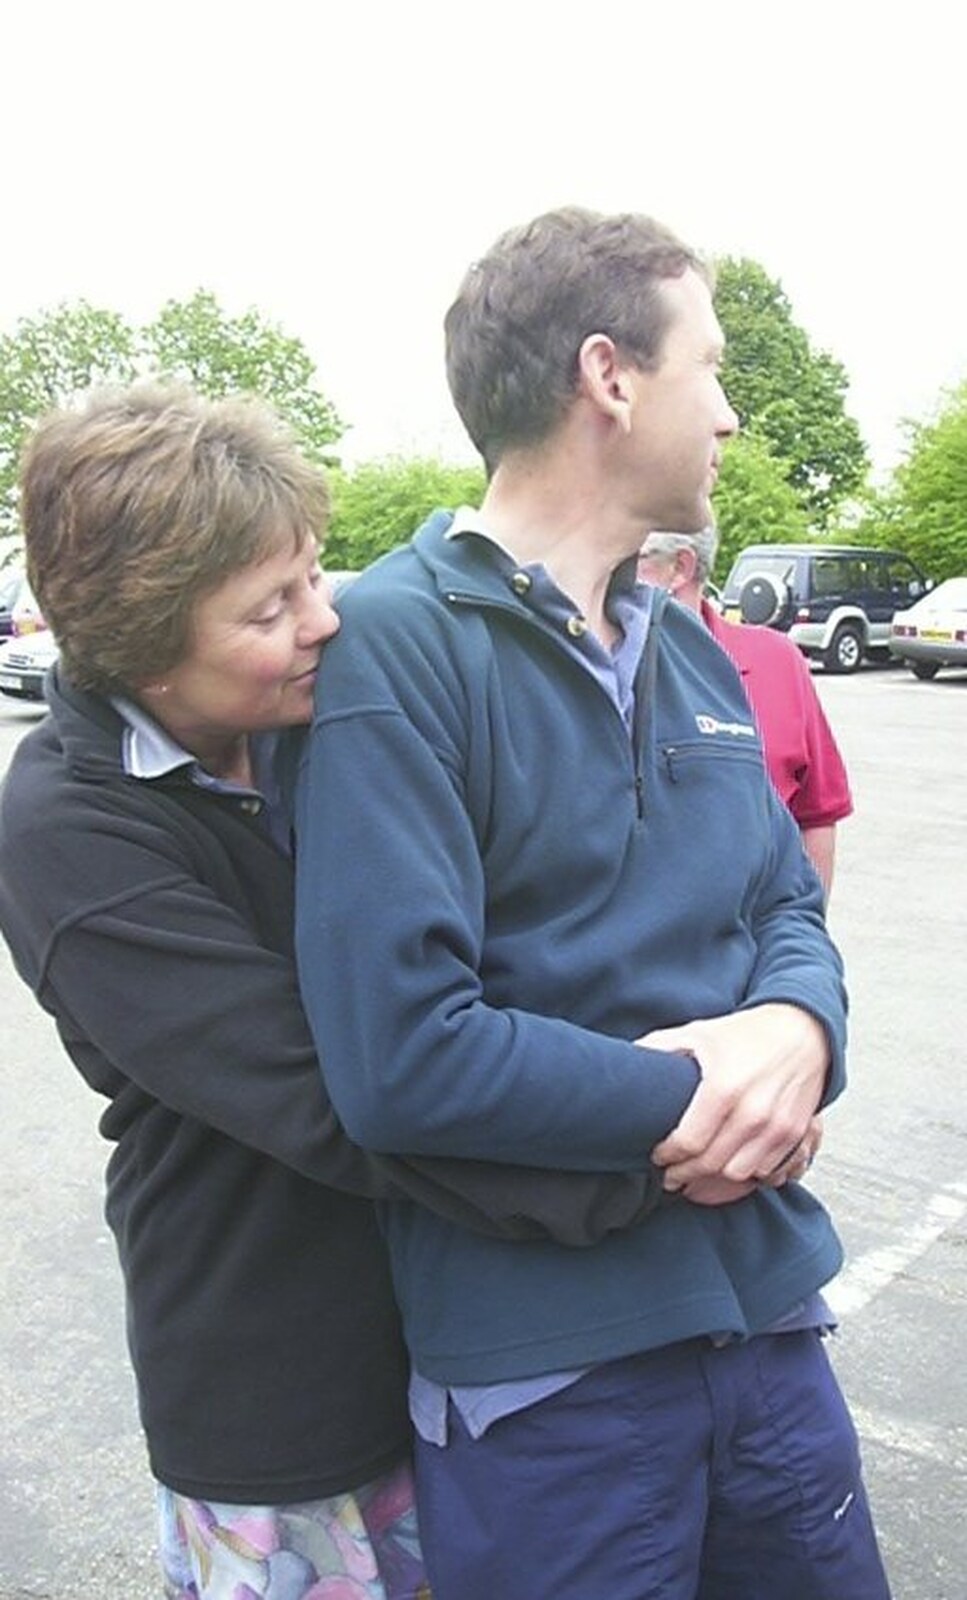 Pippa gives Apple a hug from The BSCC Annual Bike Ride, Marquess of Exeter, Oakham, Rutland - 12th May 2001